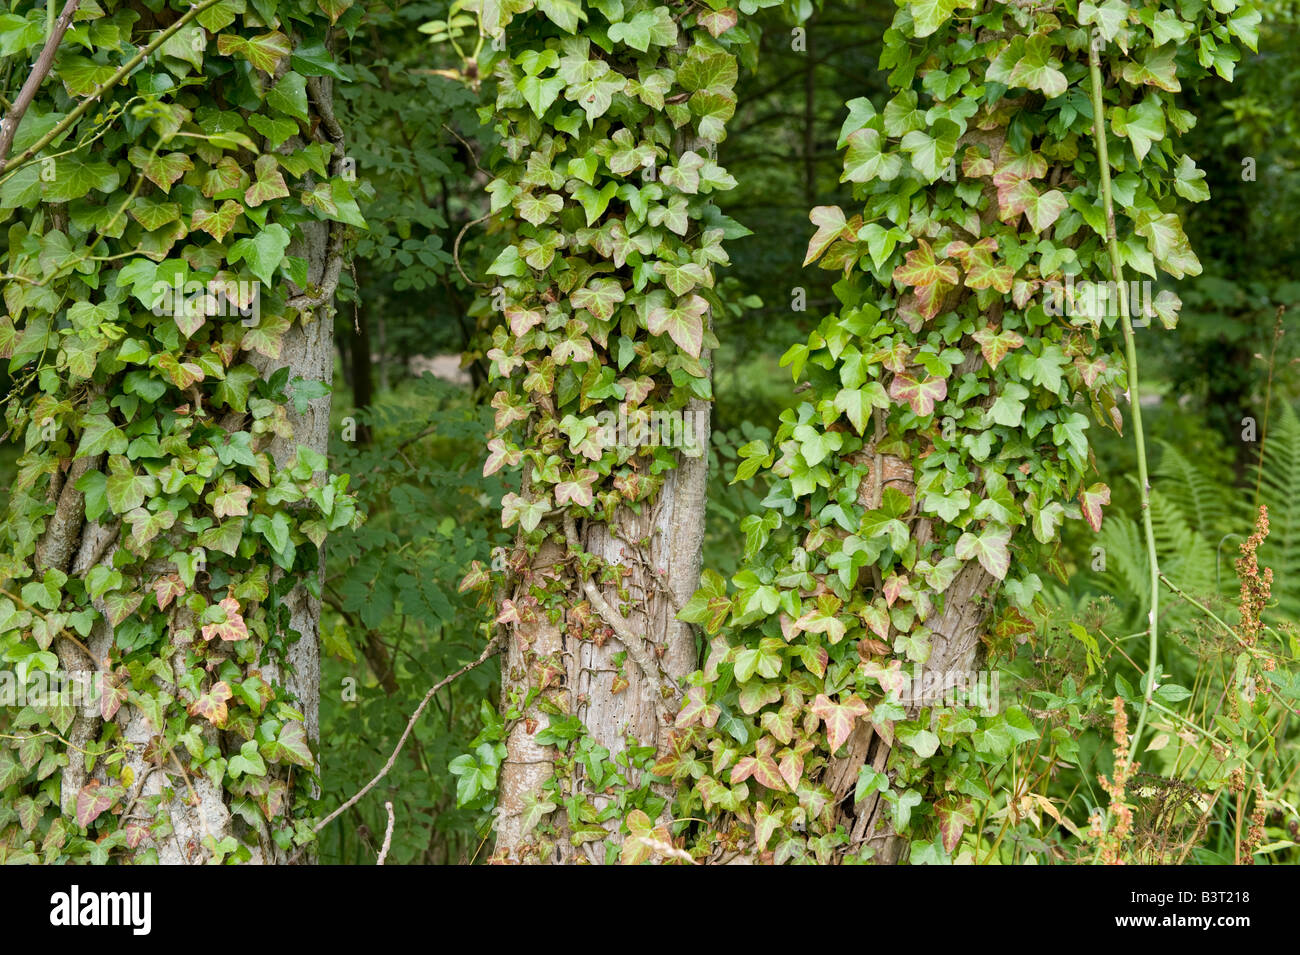 Ivy Hedera helix growing on the trunk of a tree Stock Photo